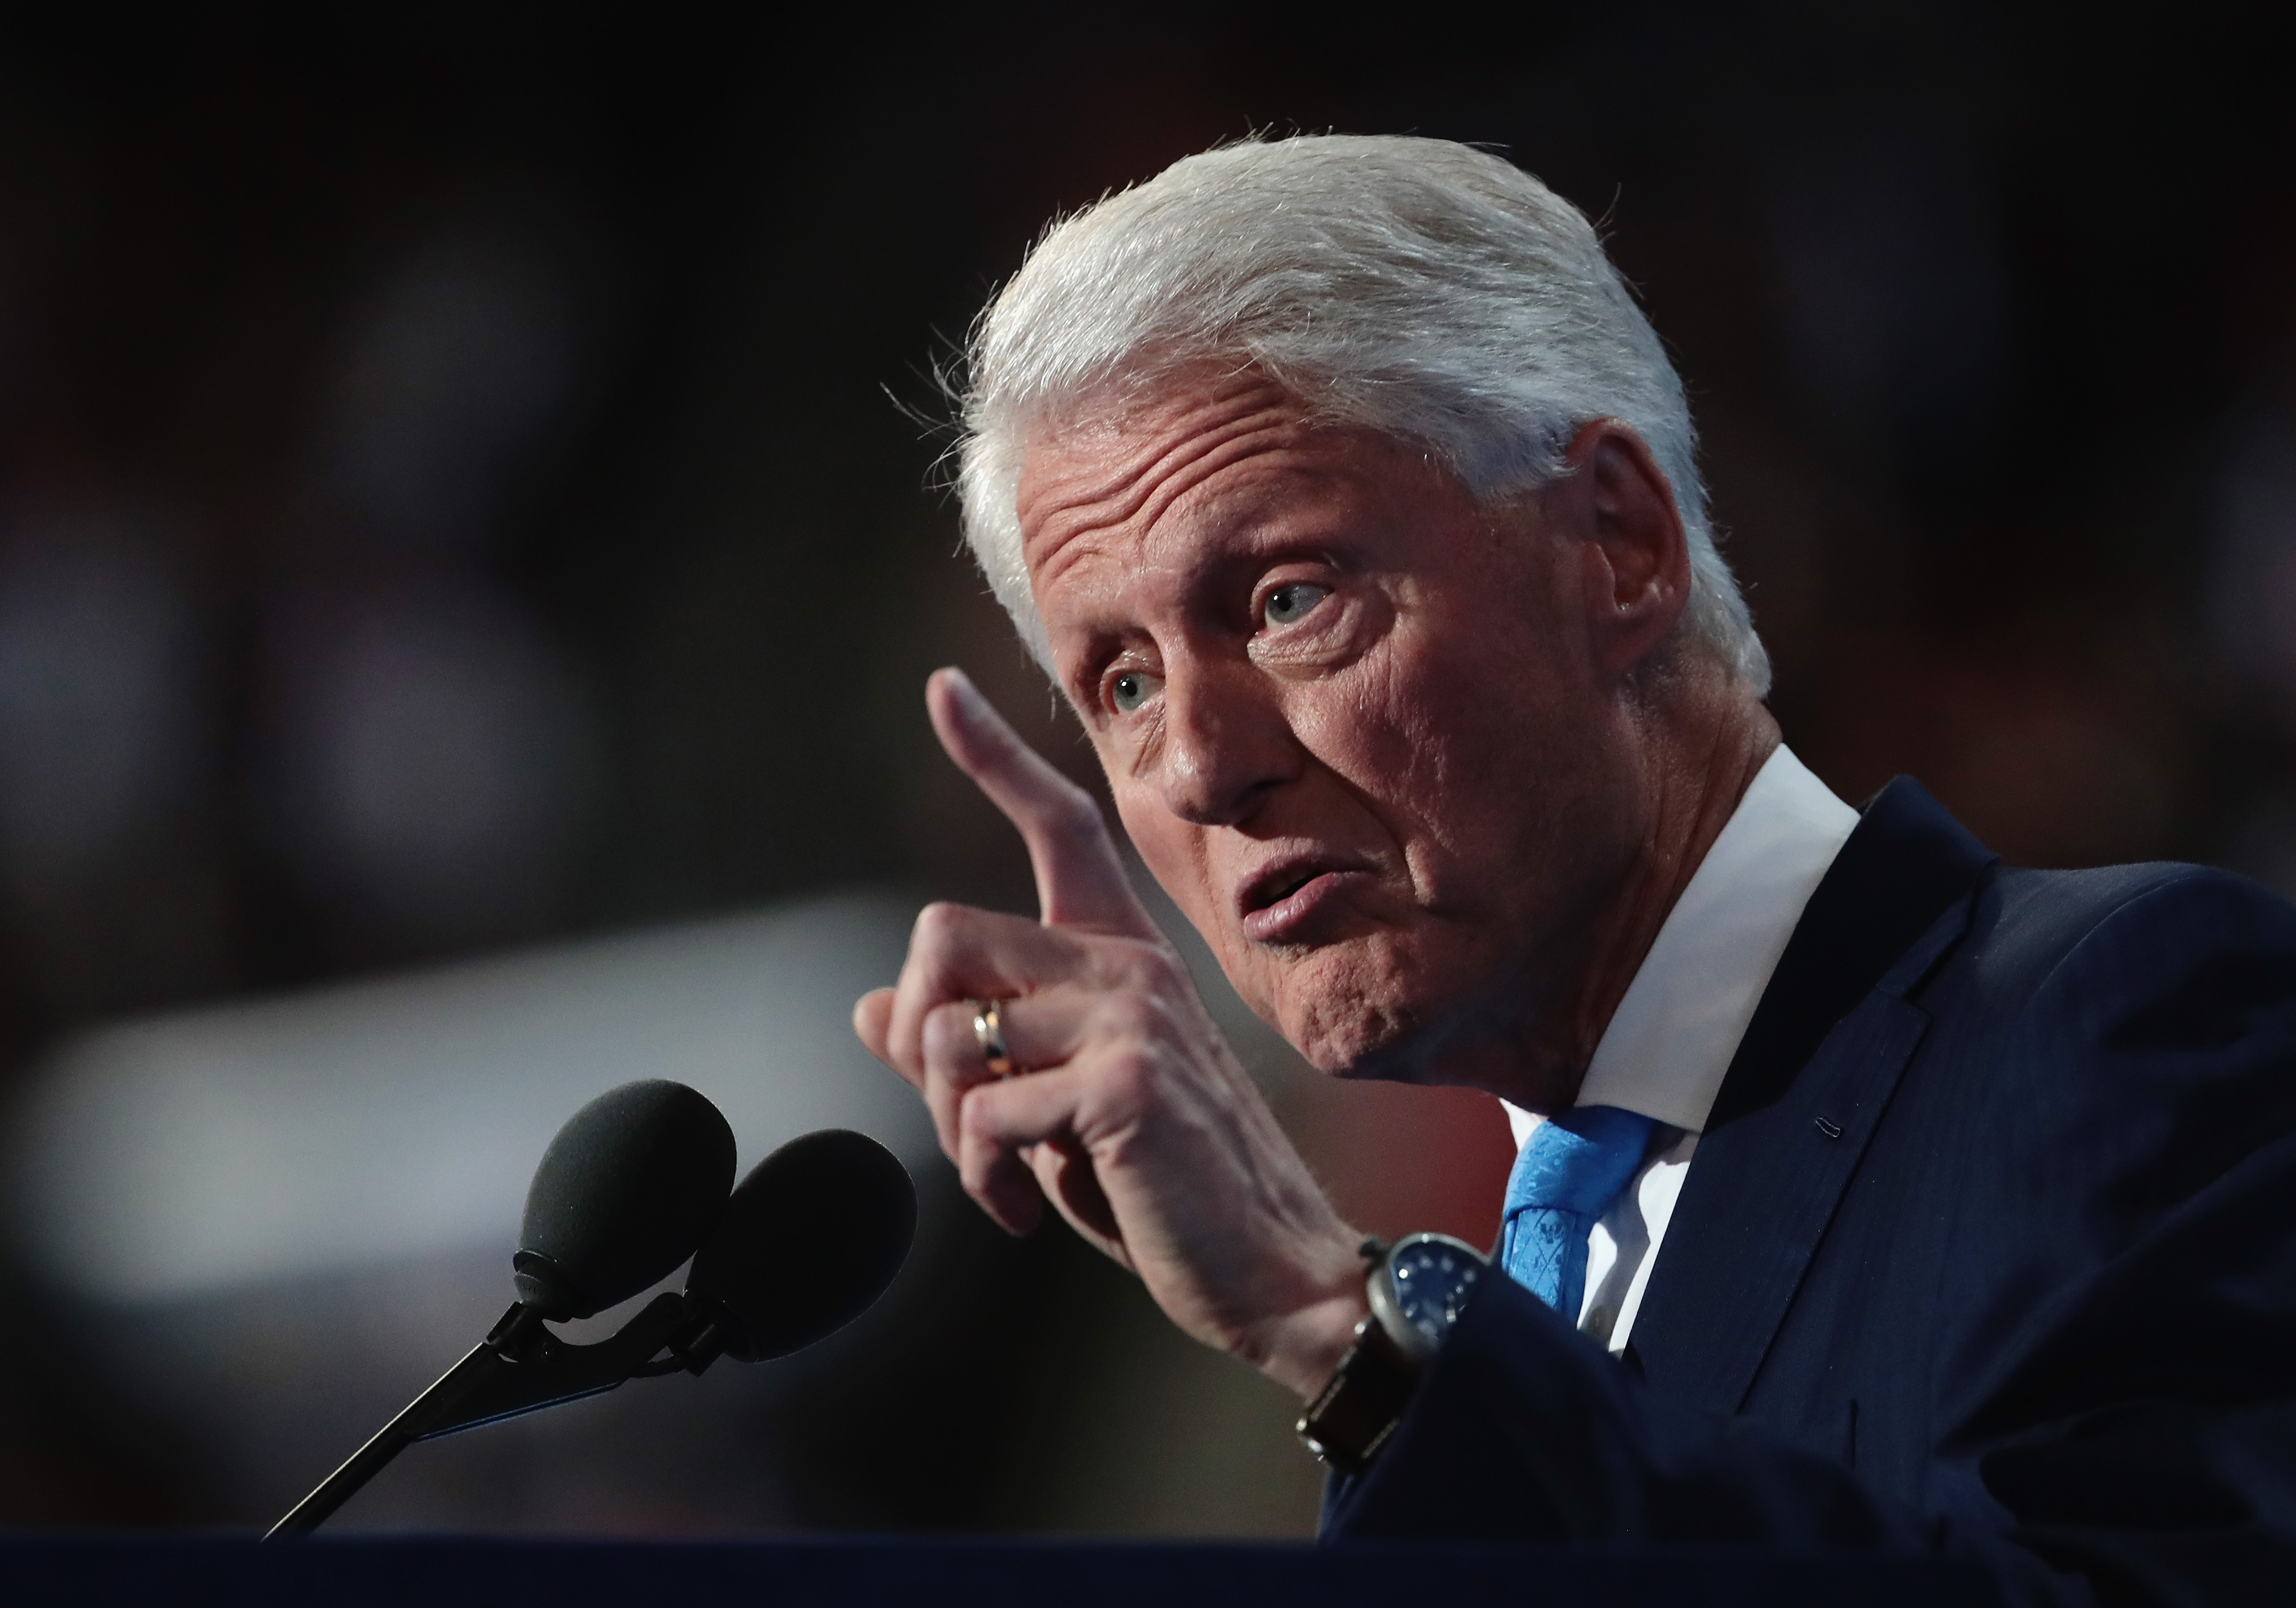 PHILADELPHIA, PA - JULY 26: Former US President Bill Clinton delivers remarks on the second day of the Democratic National Convention at the Wells Fargo Center, July 26, 2016 in Philadelphia, Pennsylvania. Democratic presidential candidate Hillary Clinton received the number of votes needed to secure the party's nomination. An estimated 50,000 people are expected in Philadelphia, including hundreds of protesters and members of the media. The four-day Democratic National Convention kicked off July 25.   Drew Angerer/Getty Images/AFP